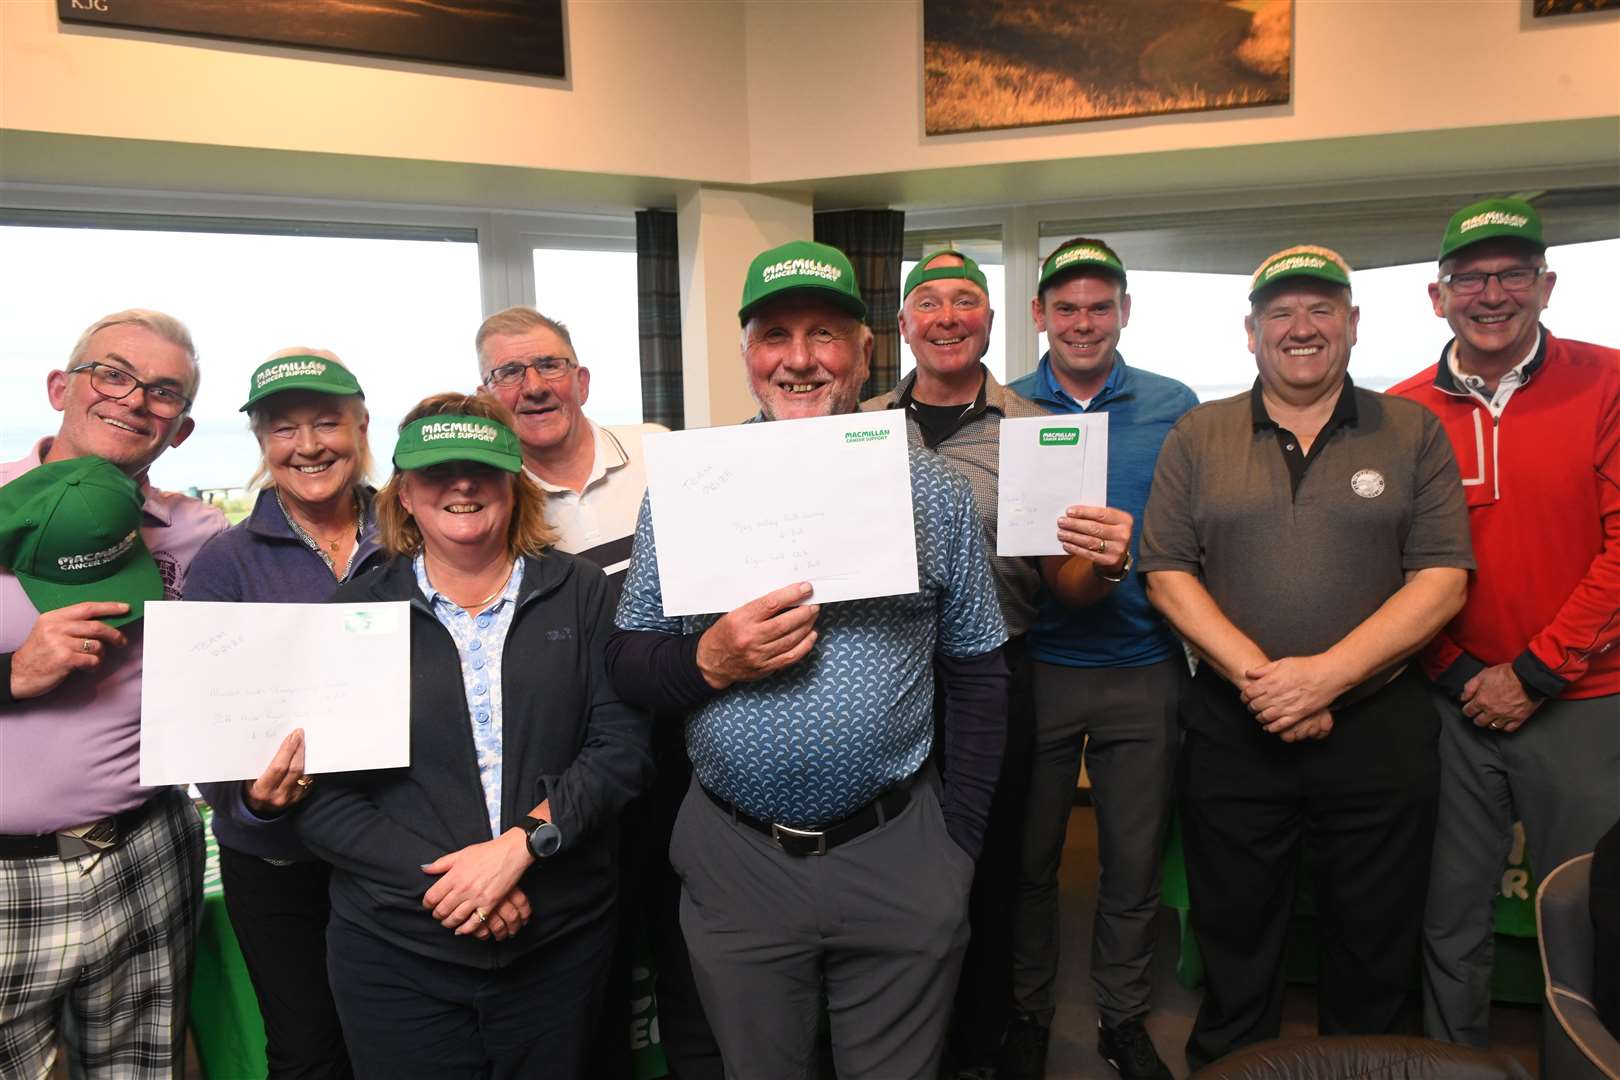 Fortrose and Rosemarkie Golf Club Captain's Team came 2nd, The Alba Service and Supply Team came 1st and Ross-shire Engineering Team came 3rd.